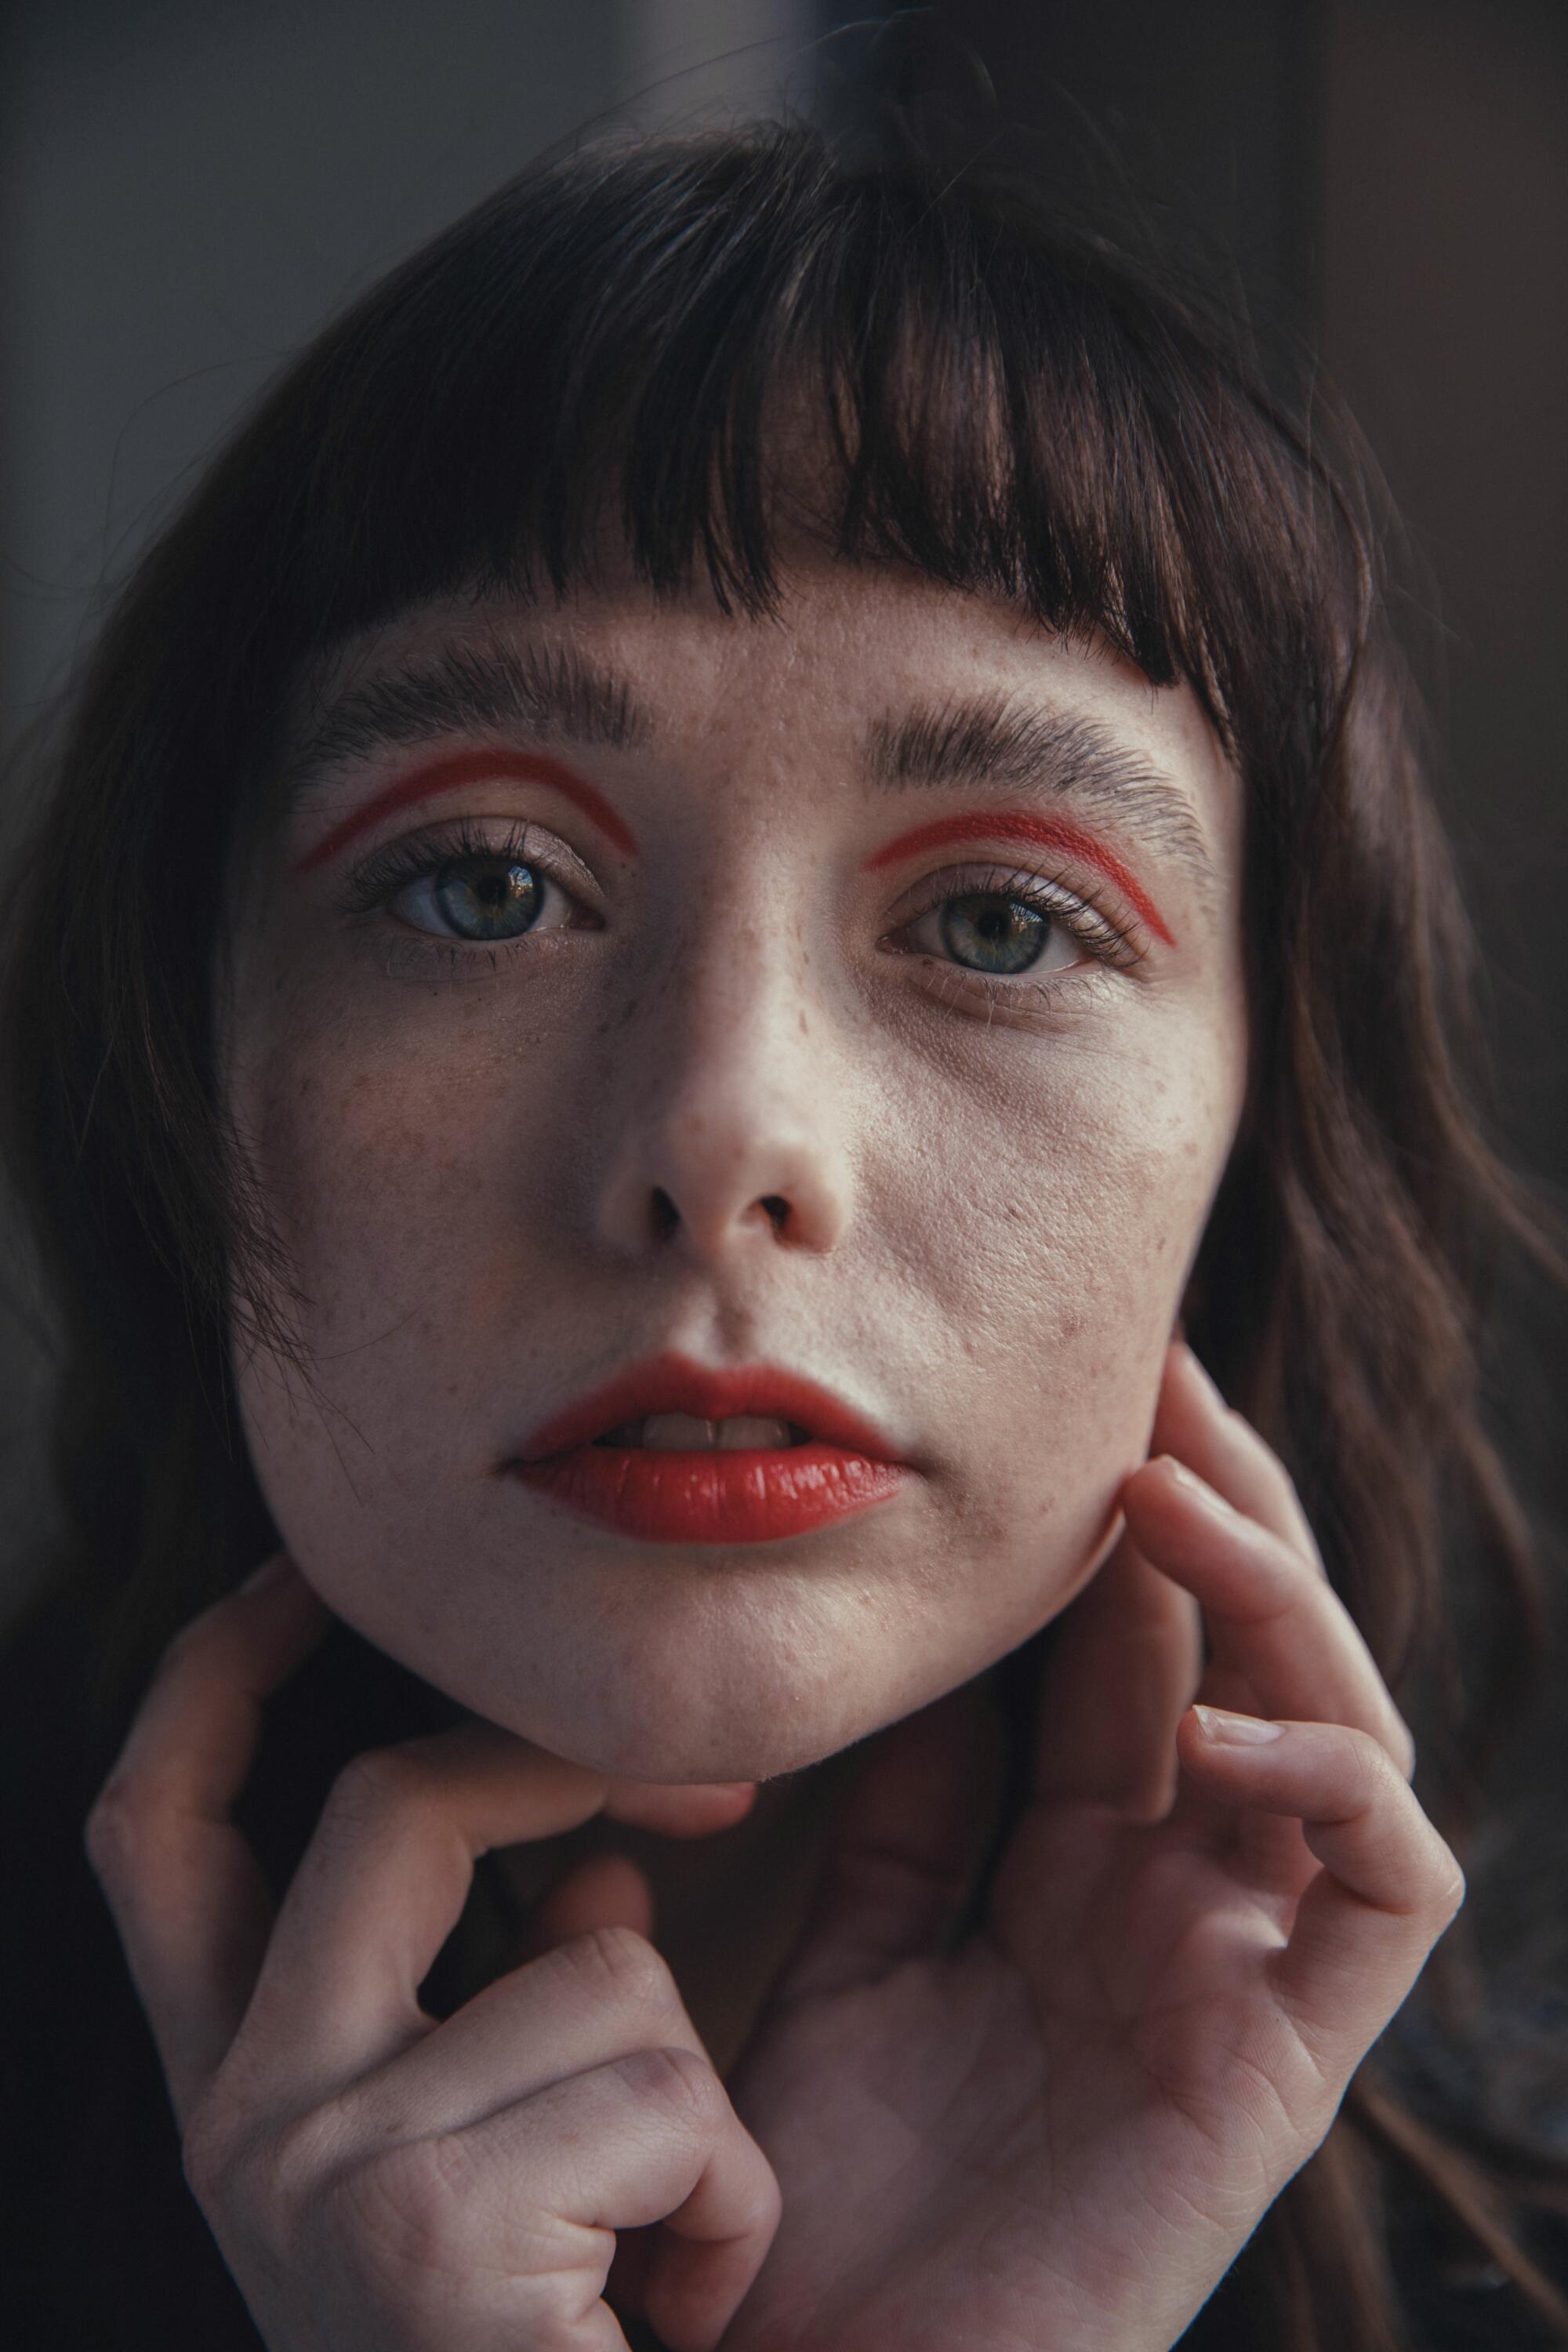 A woman with red lipstick and red eye makeup holds her hands to her face.